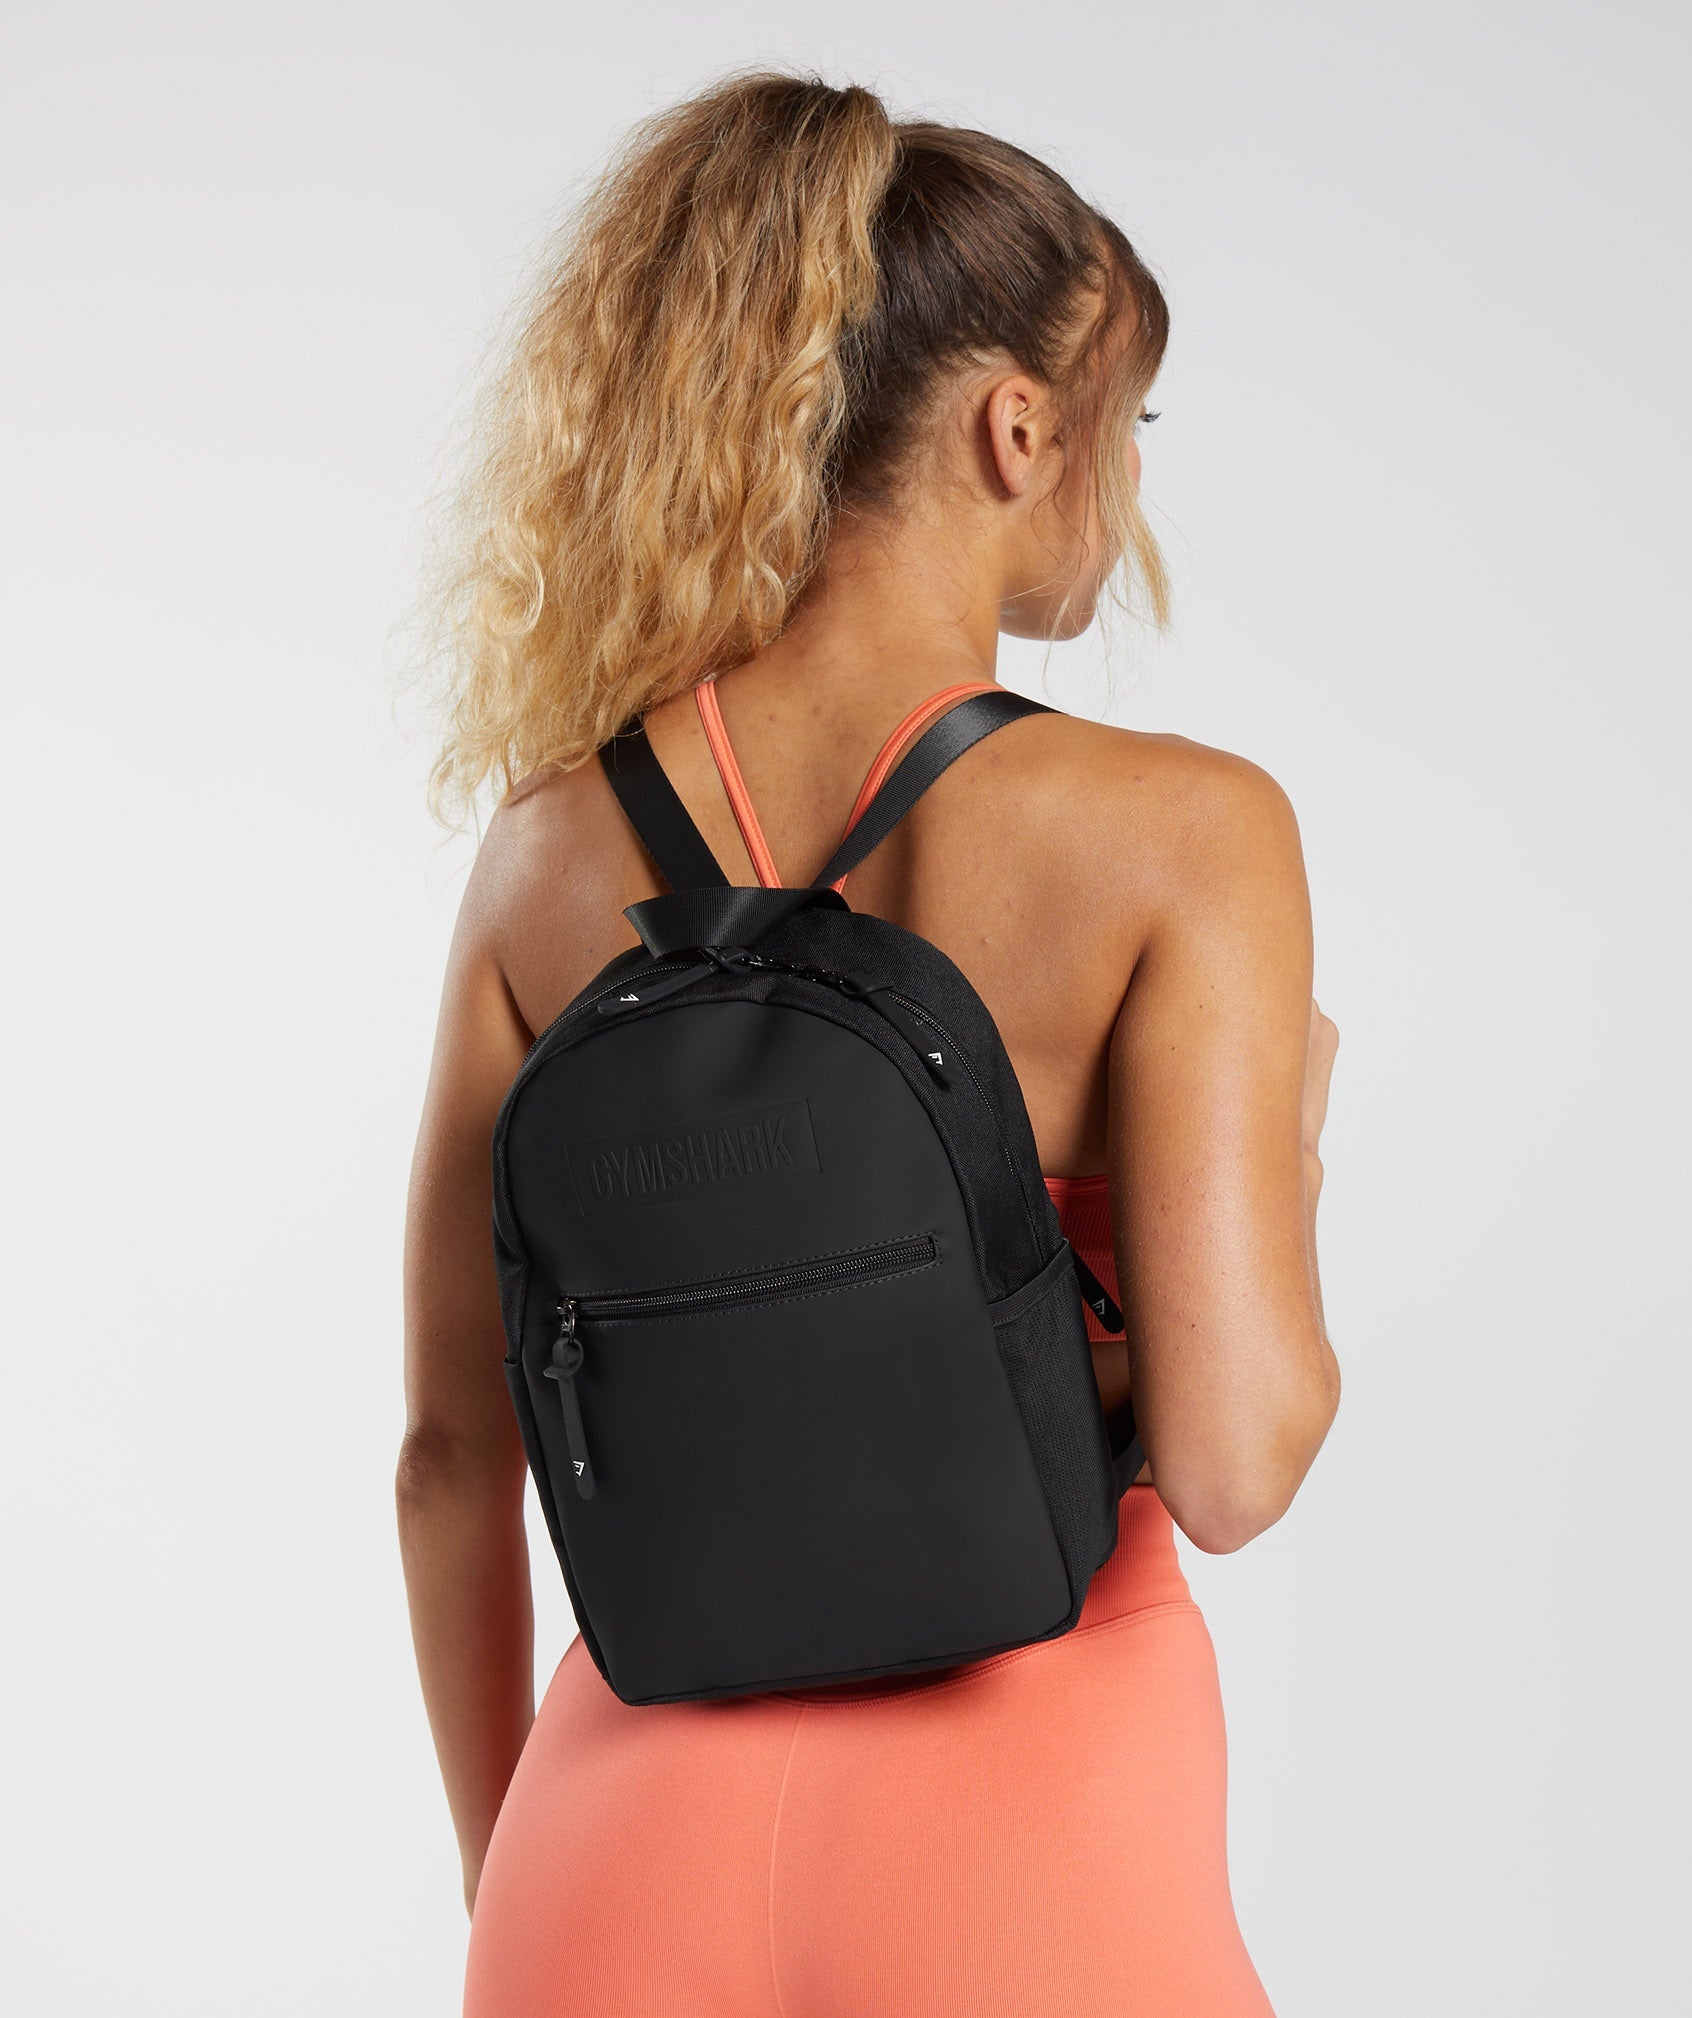 Small Gym Bags - Men's & Women's Small Bags - Gymshark